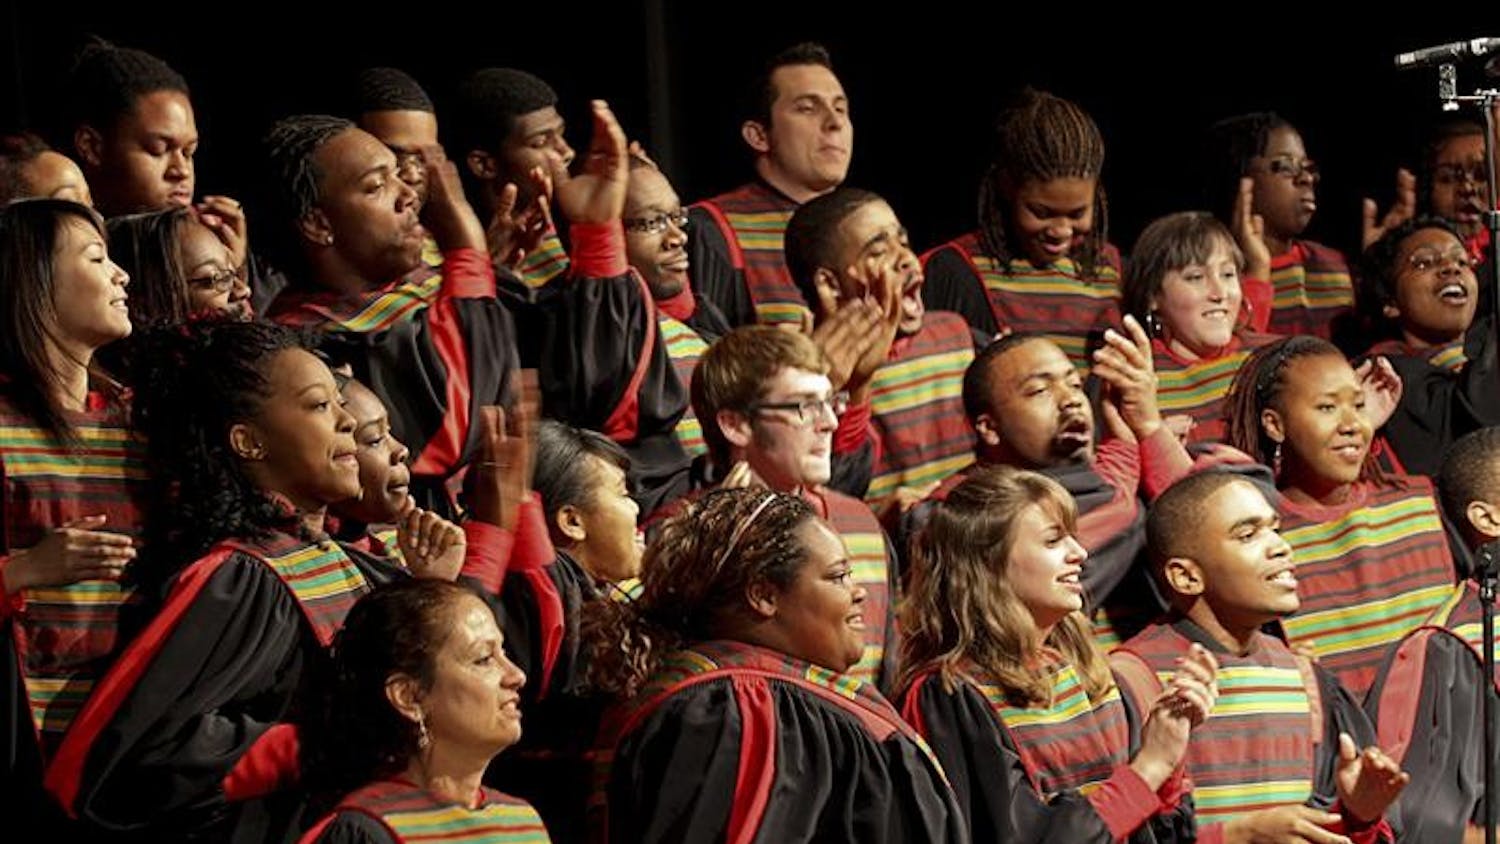 The African American Choral Ensemble sings "Hallelujah Hosanna," a South African/Swaziland praise song, Saturday evening at the John Waldron Arts Center Auditorium. The program included classically-arranged pieces, comtemporary Gospel and jazz-infused arrangements.